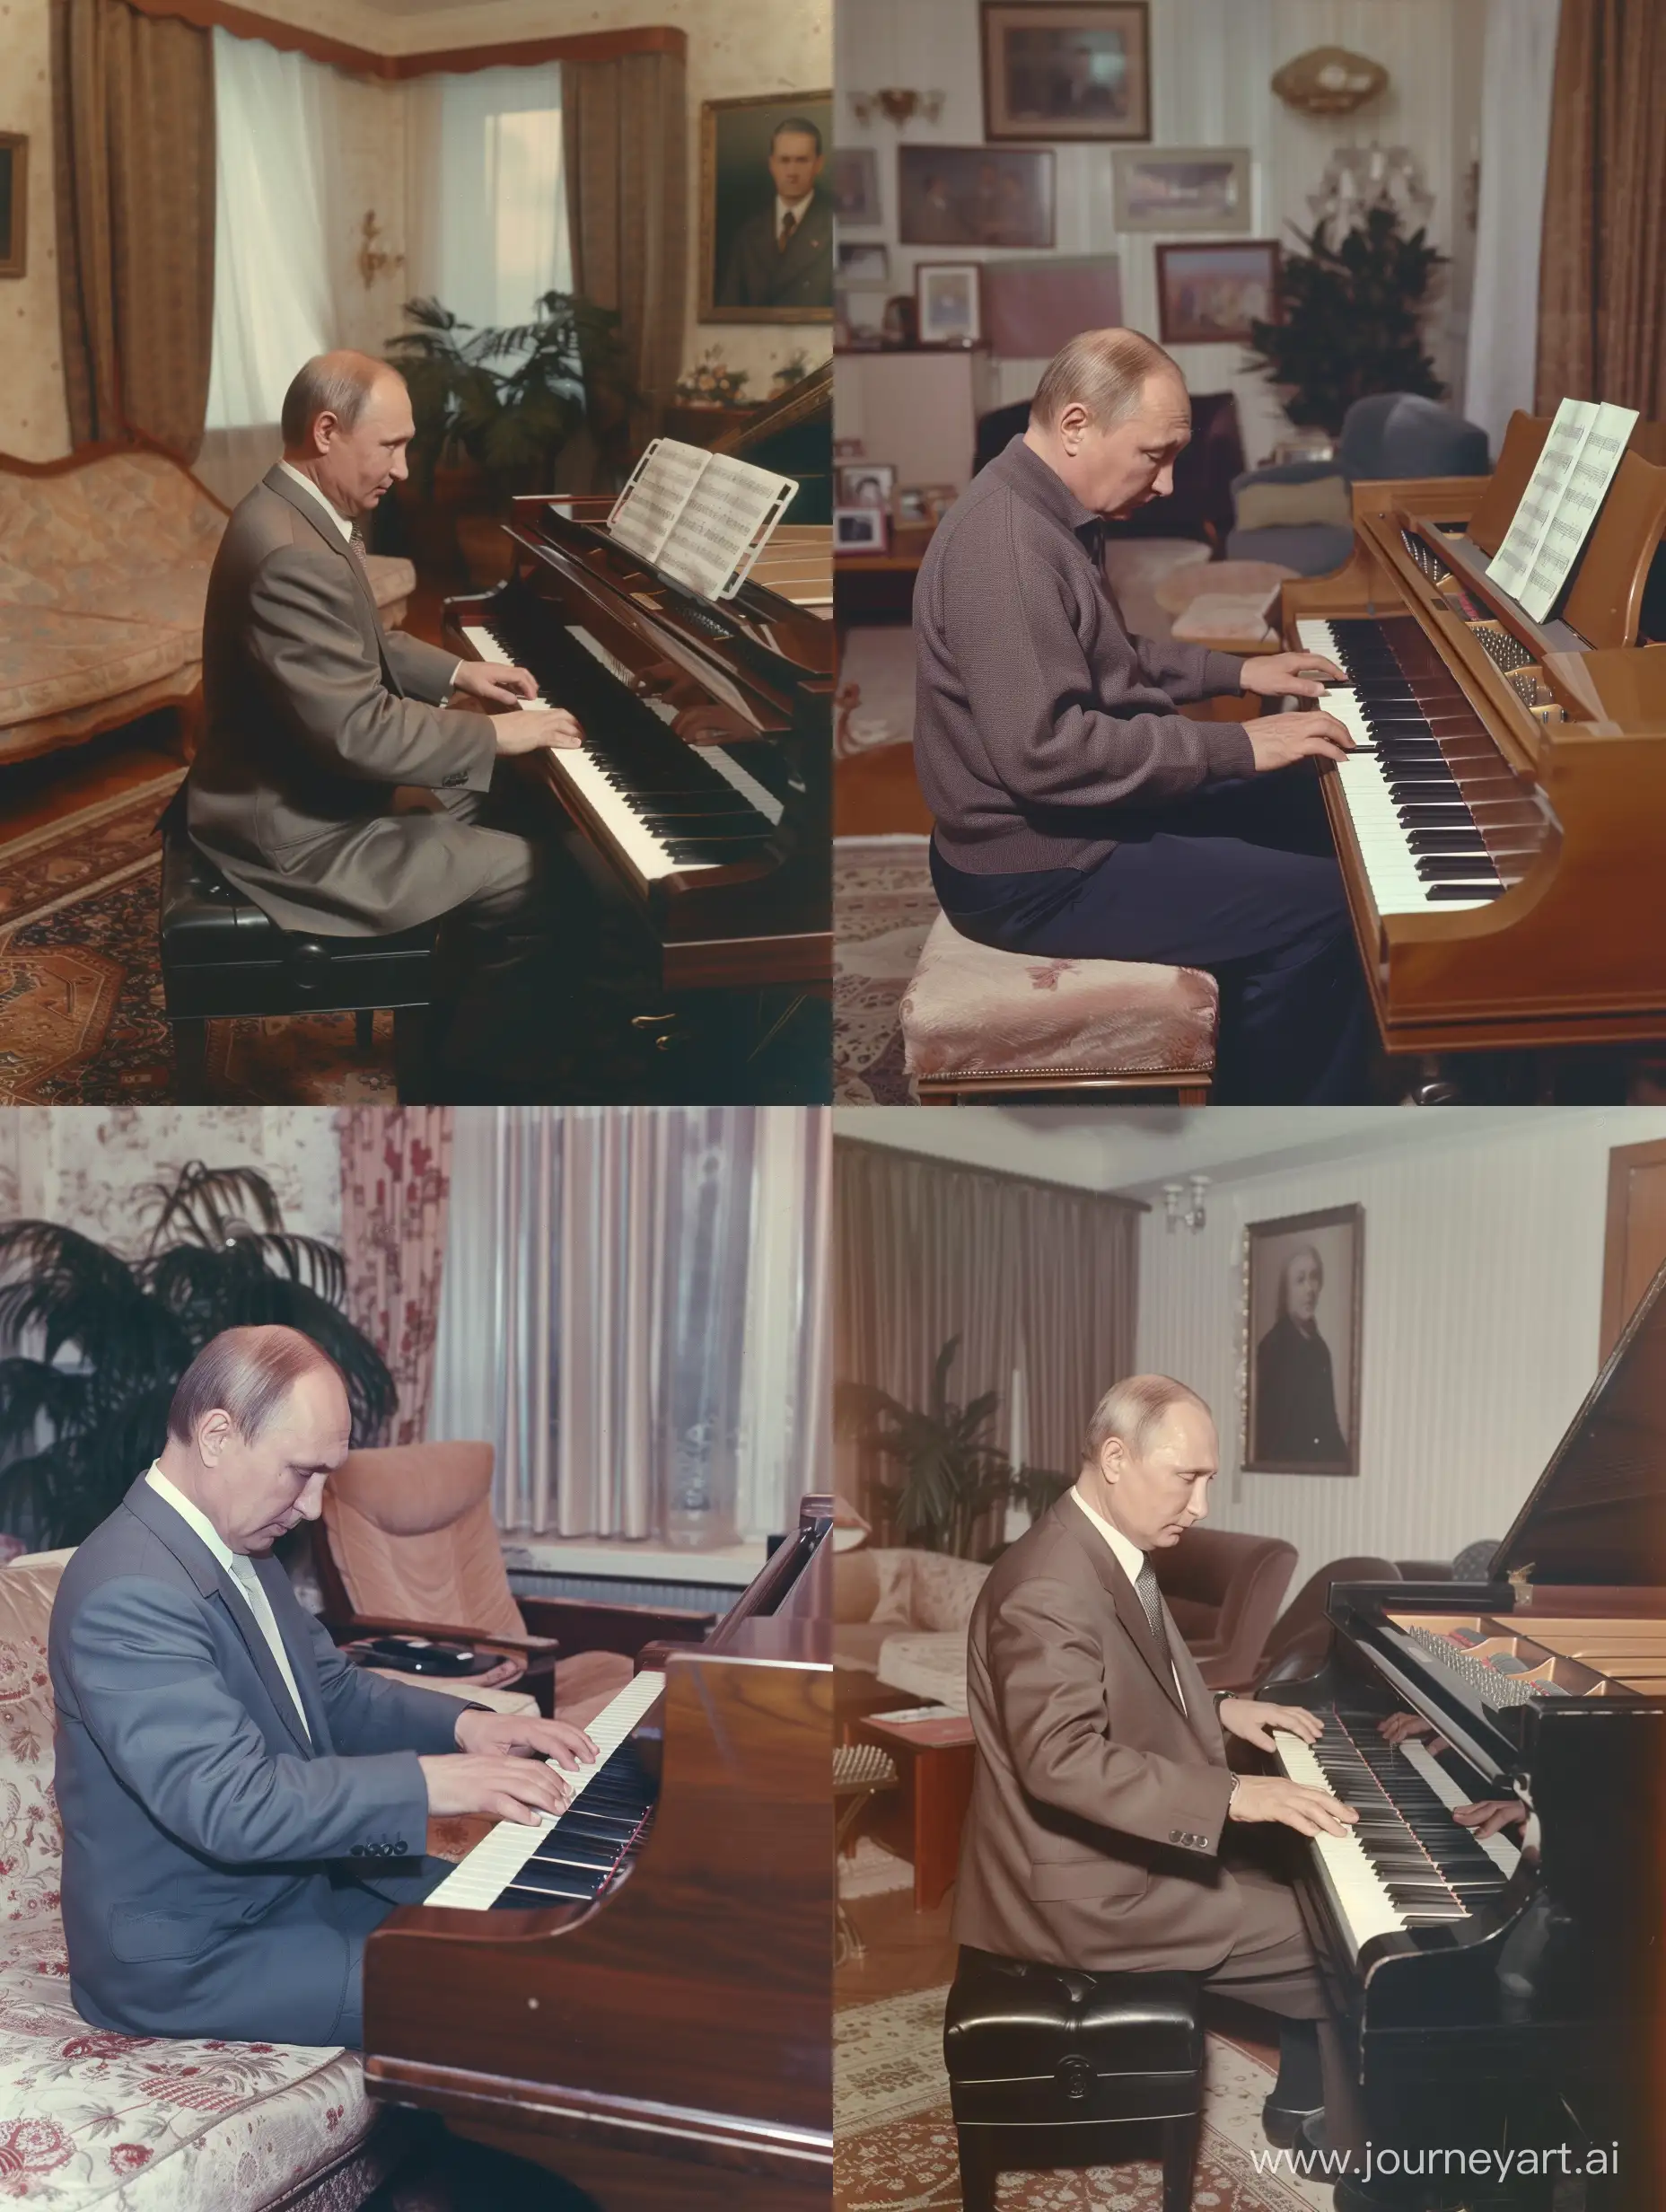 Vladimir-Putin-Playing-Piano-in-Colorful-Living-Room-Portrait